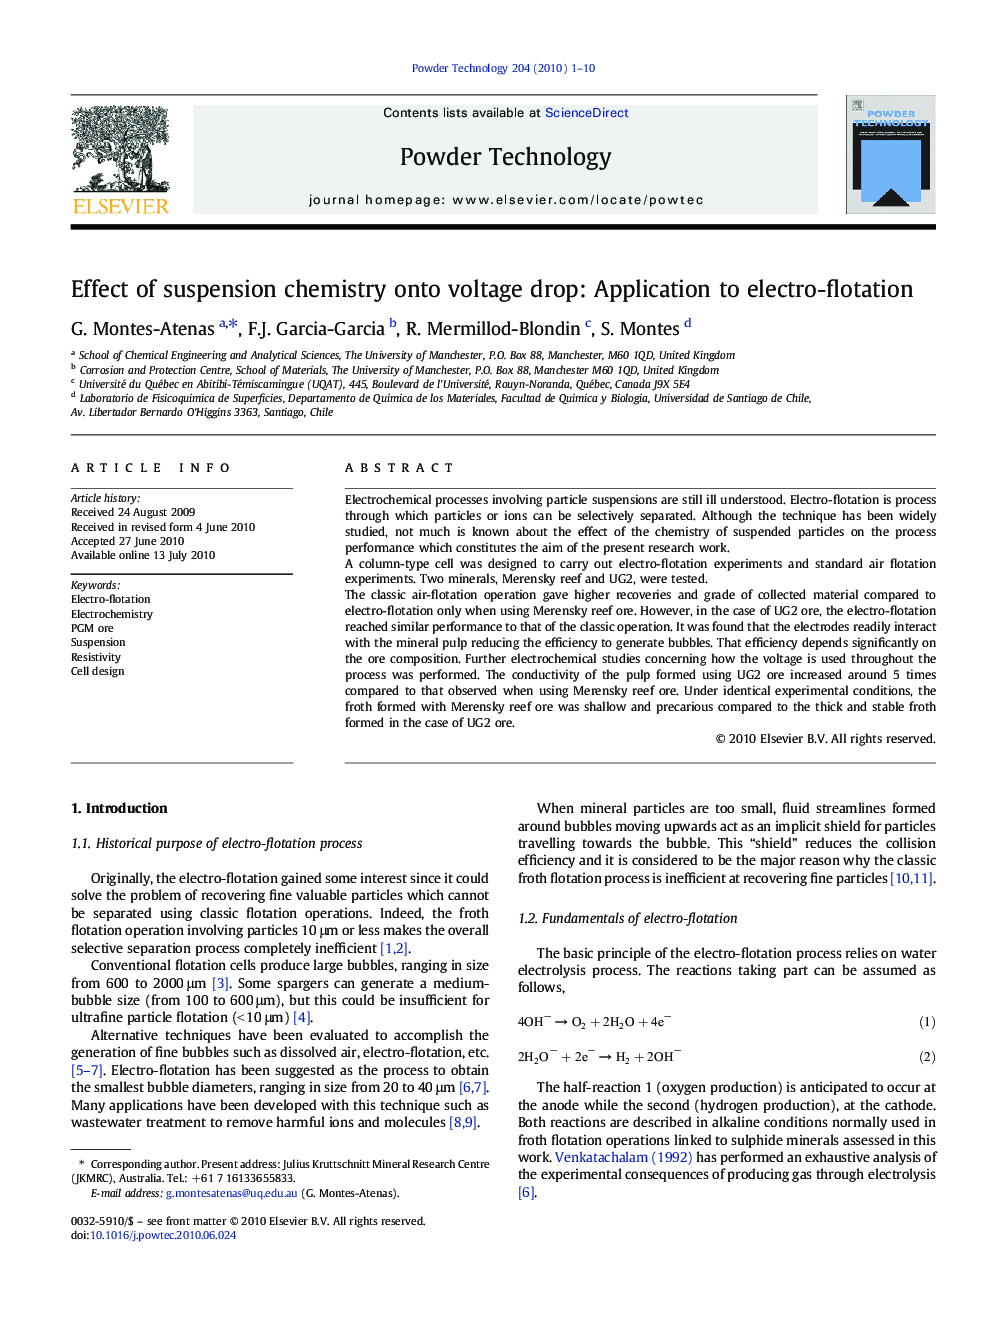 Effect of suspension chemistry onto voltage drop: Application to electro-flotation